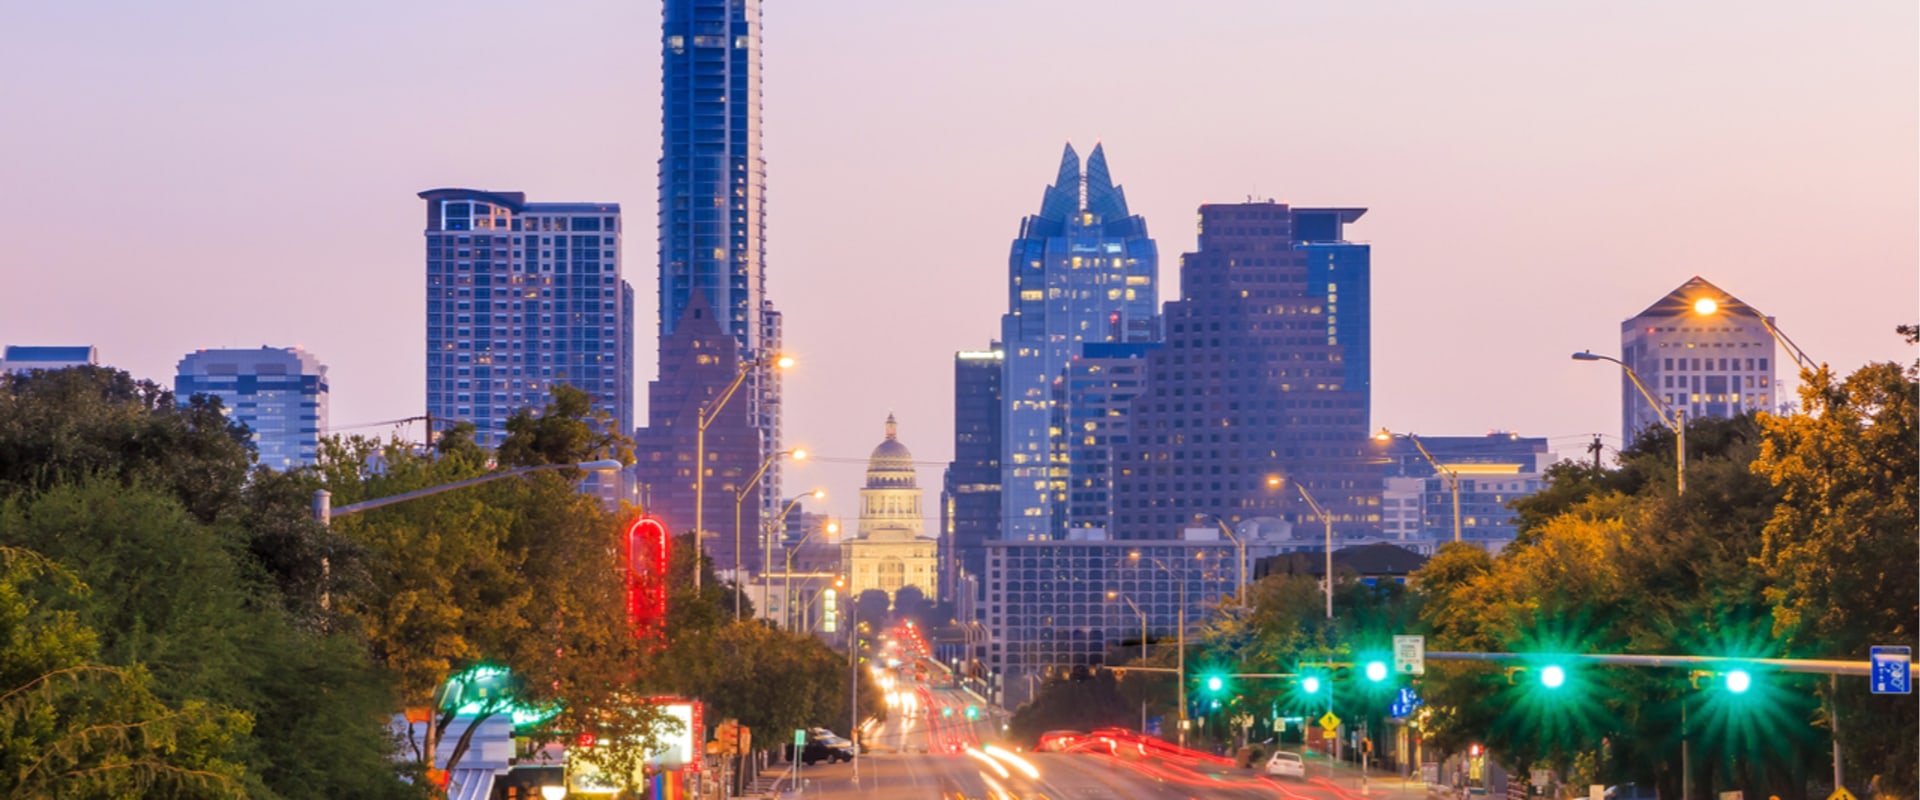 Is texas good for real estate investment?